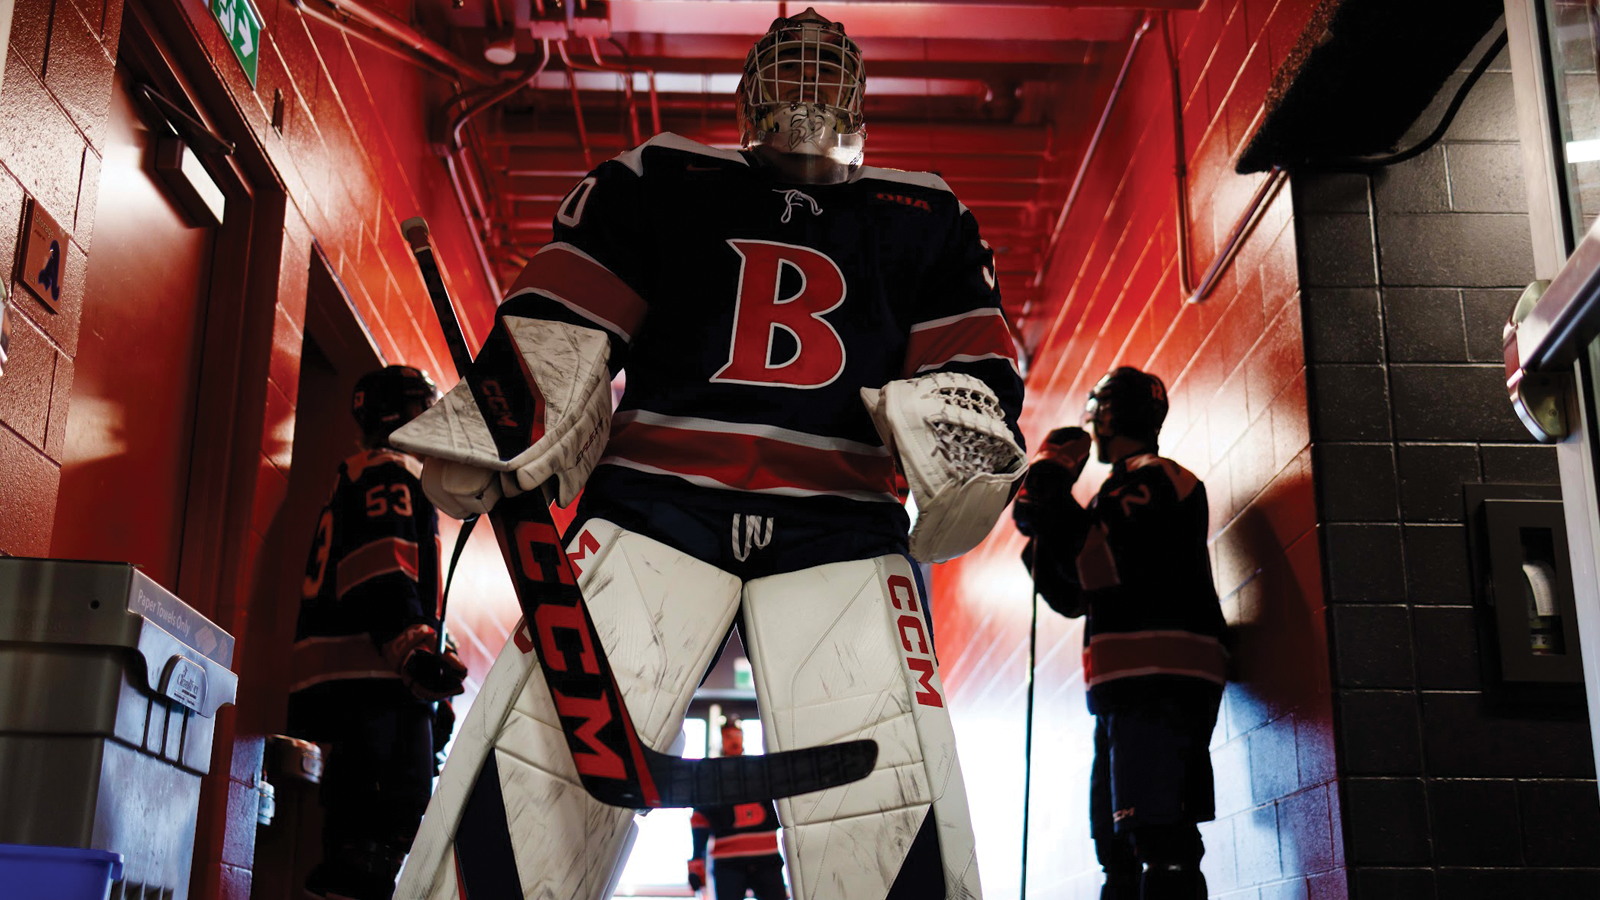 Brock goaltender Connor Ungar standing in the tunnel in full uniform and equipment prior to a game